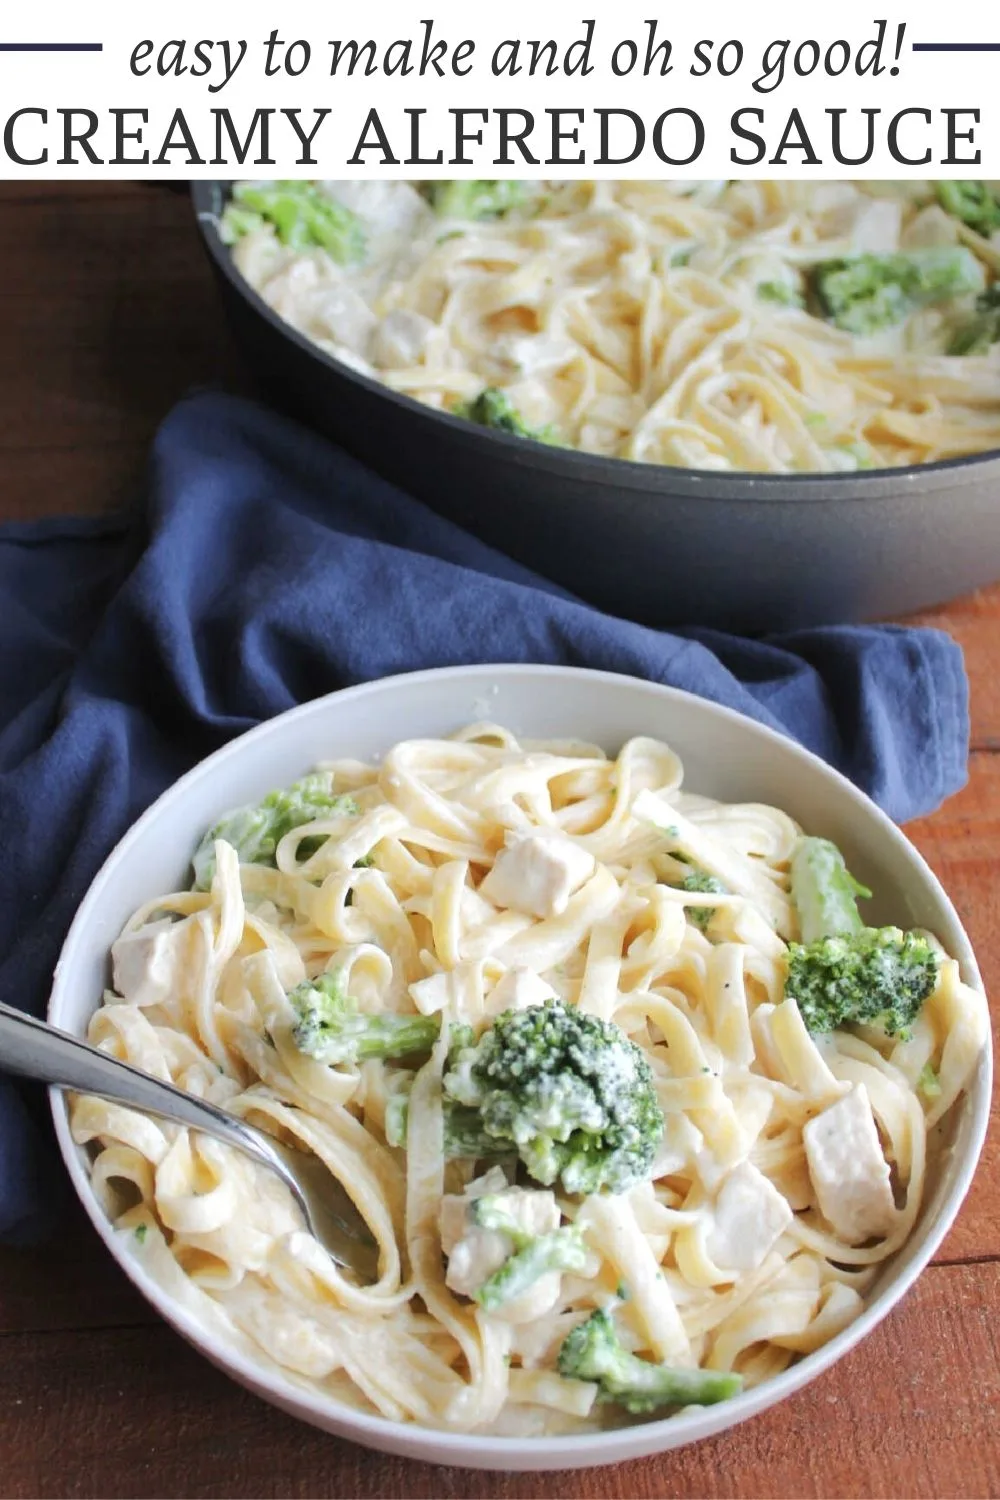 If you are in the mood for pasta coated in a rich creamy sauce, you are in the right place. This homemade chicken fettuccine alfredo recipe is one of our all time favorite meals. This recipe makes the perfect amount to coat a pound of pasta plus a couple of extra add-ins. We like chicken or shrimp and broccoli, but you can add whatever you like.